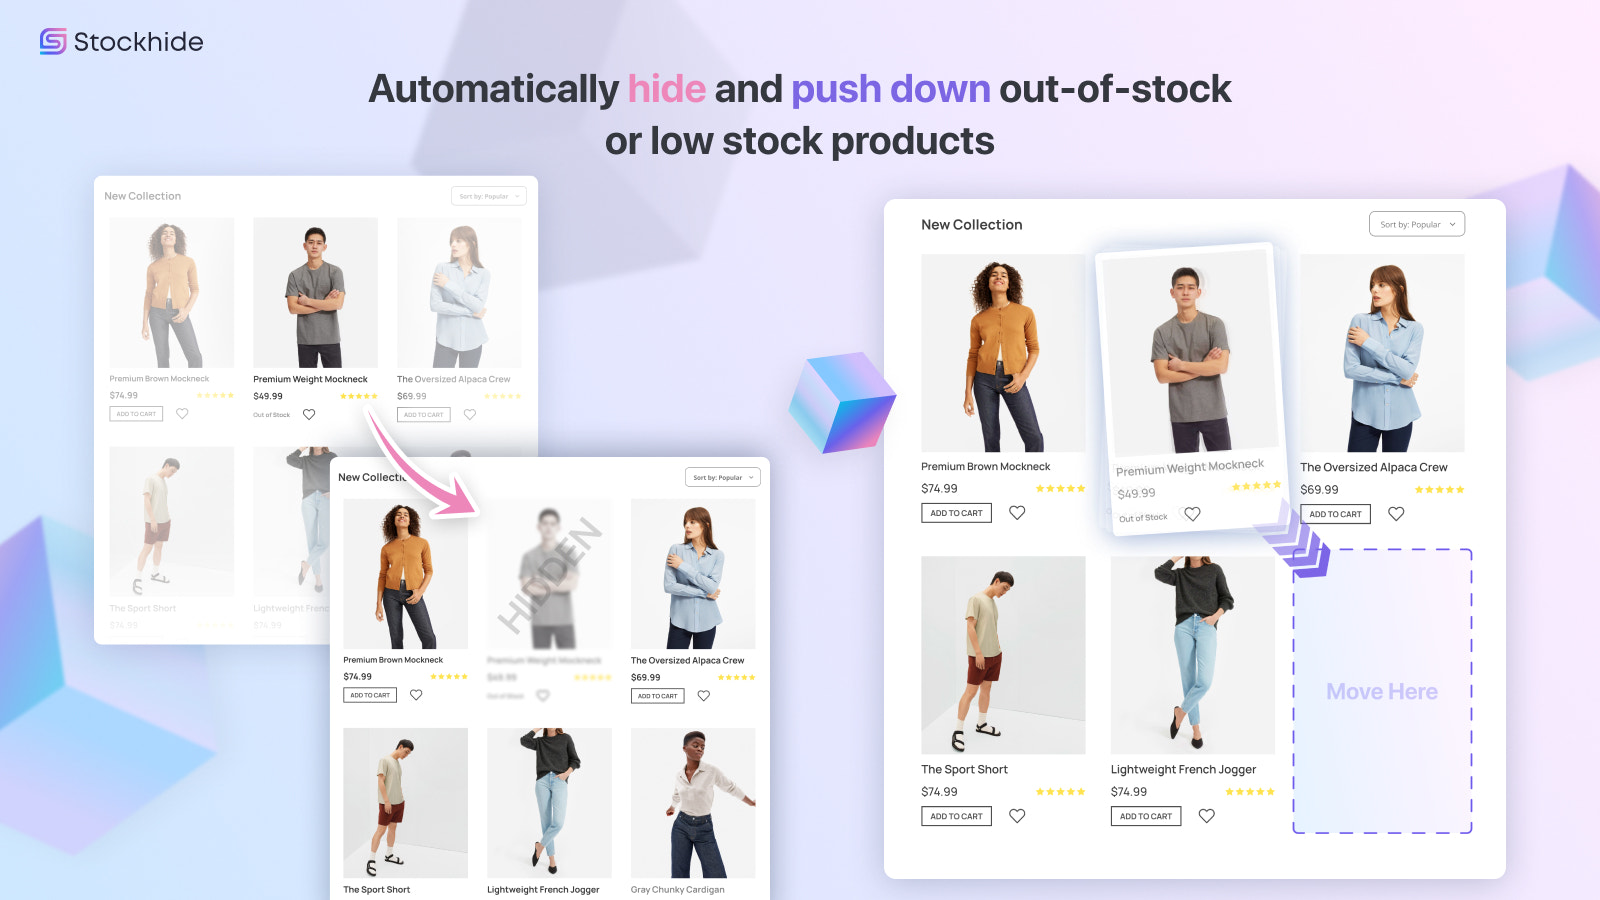 Automatically hide, redirect or push down out-of-stock